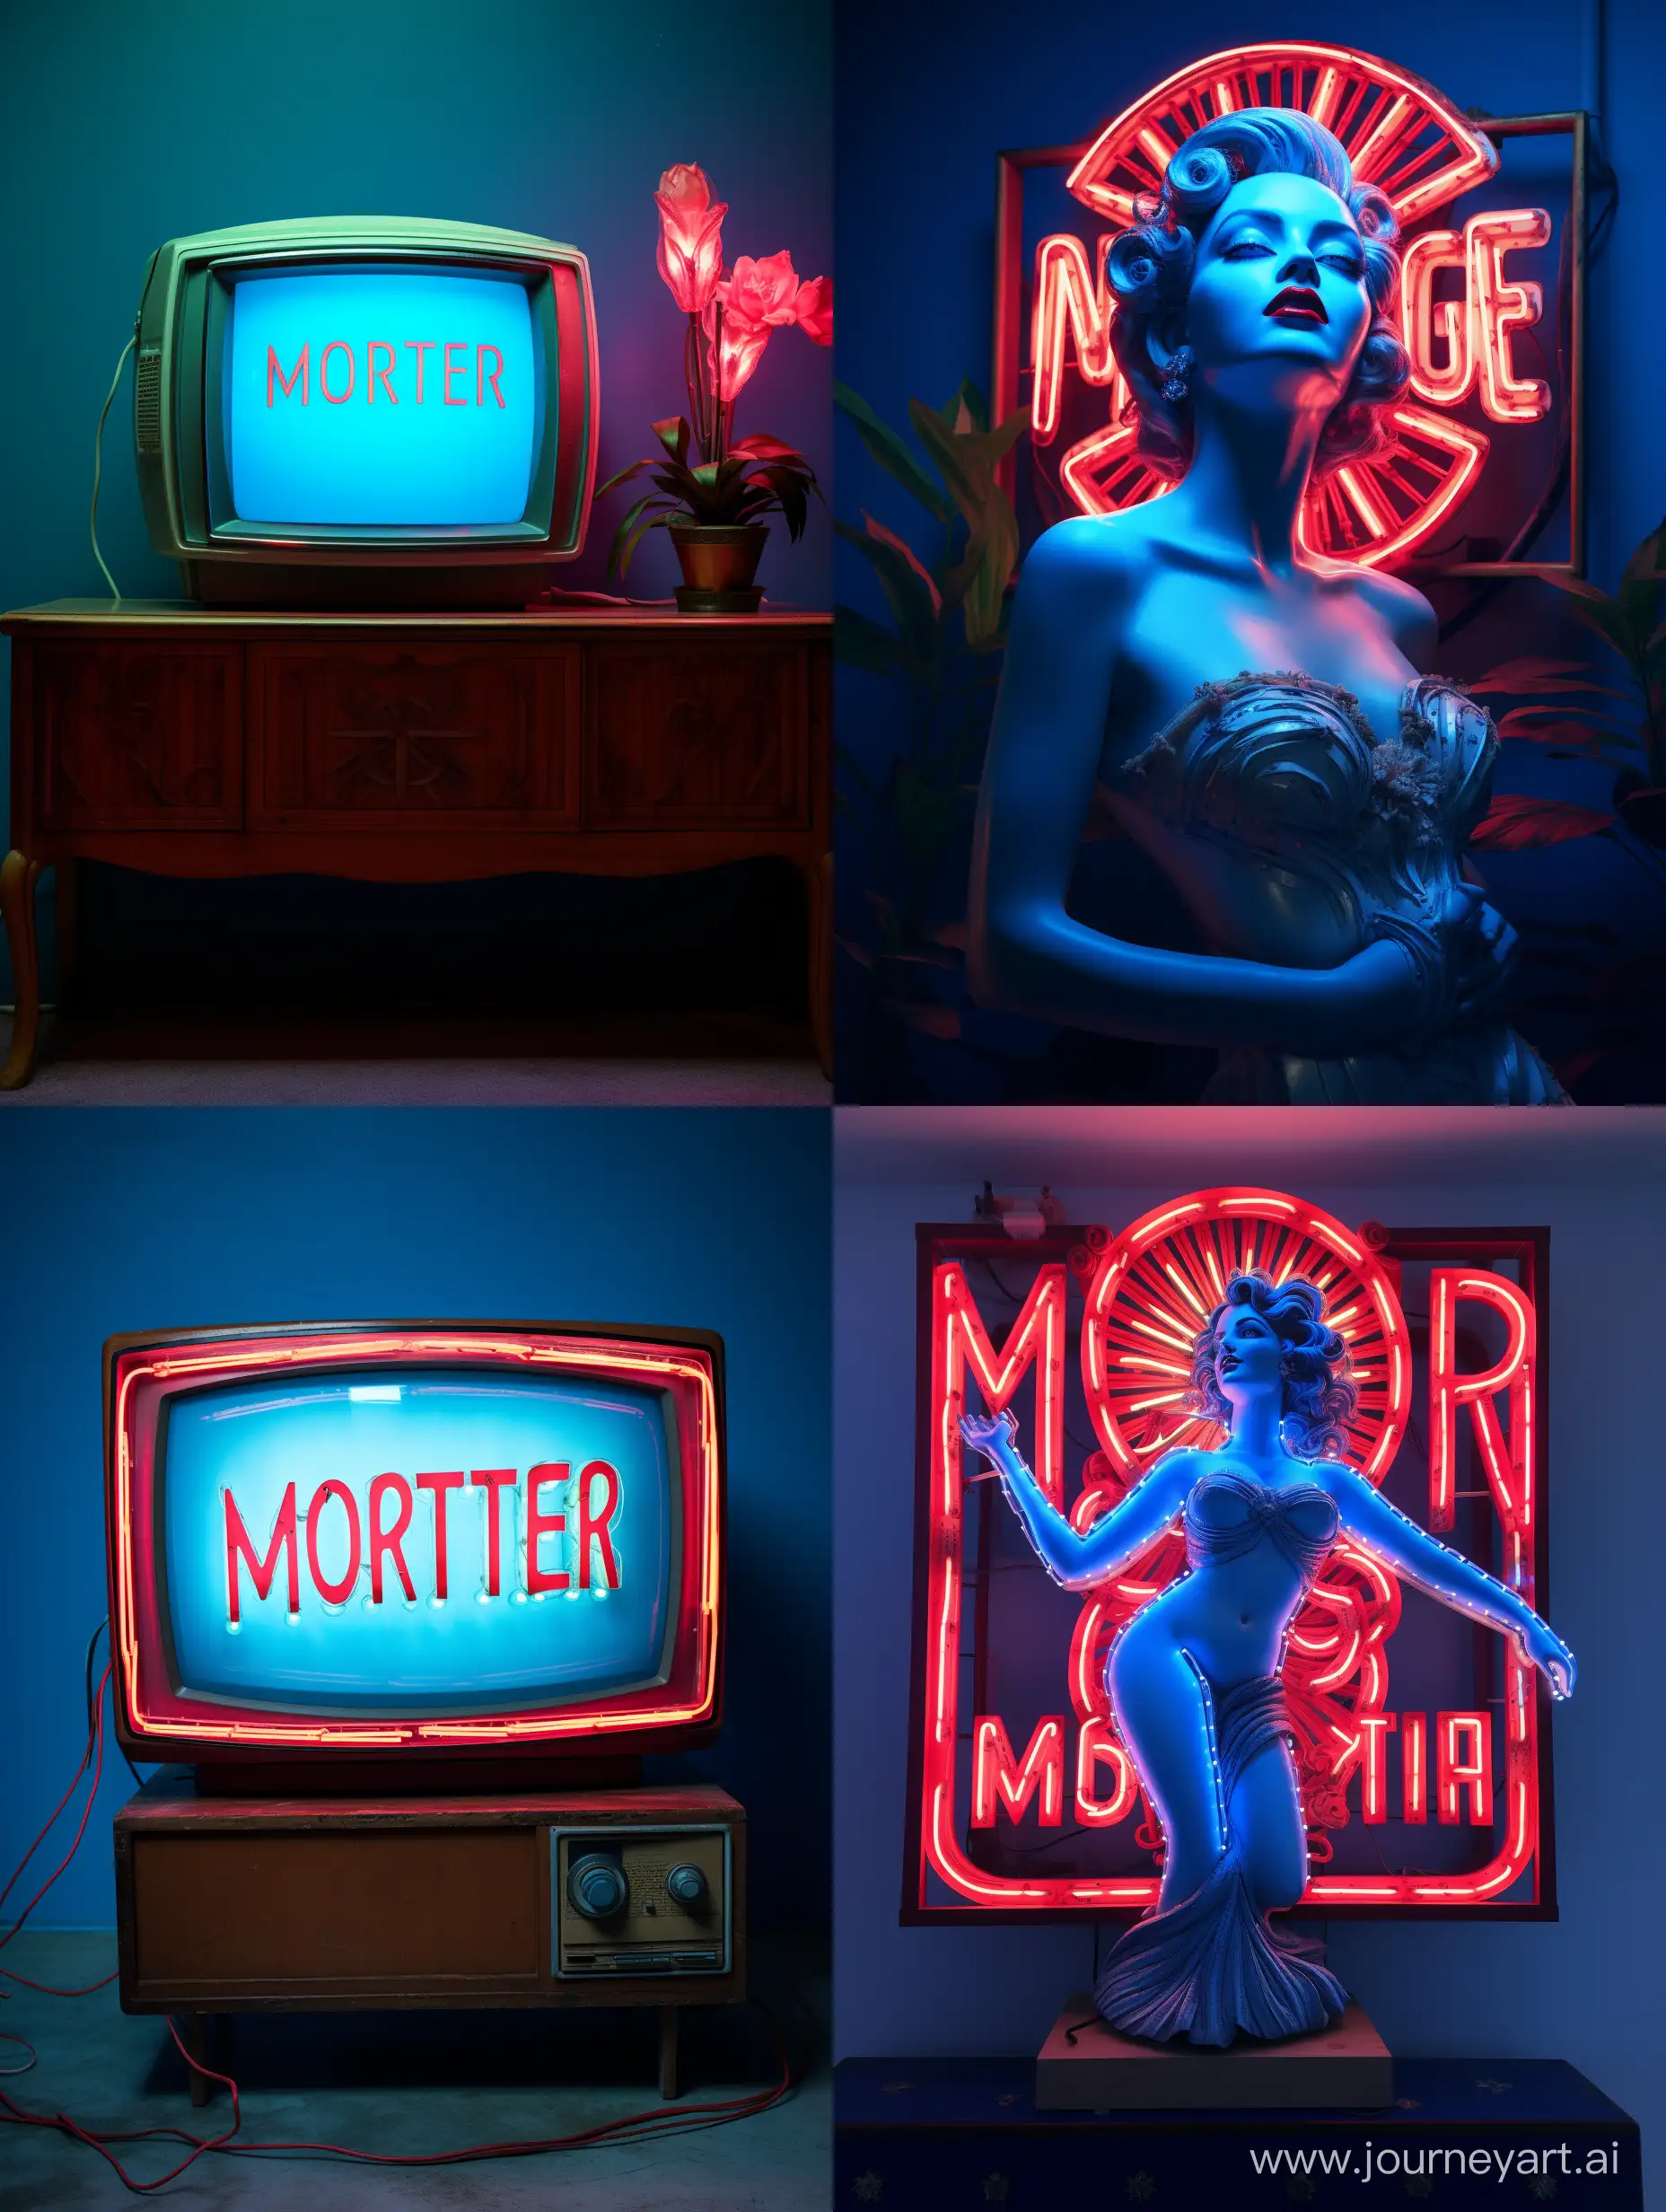 Vibrant-Neon-Sign-MOTHER-Illuminating-a-Blue-Monitor